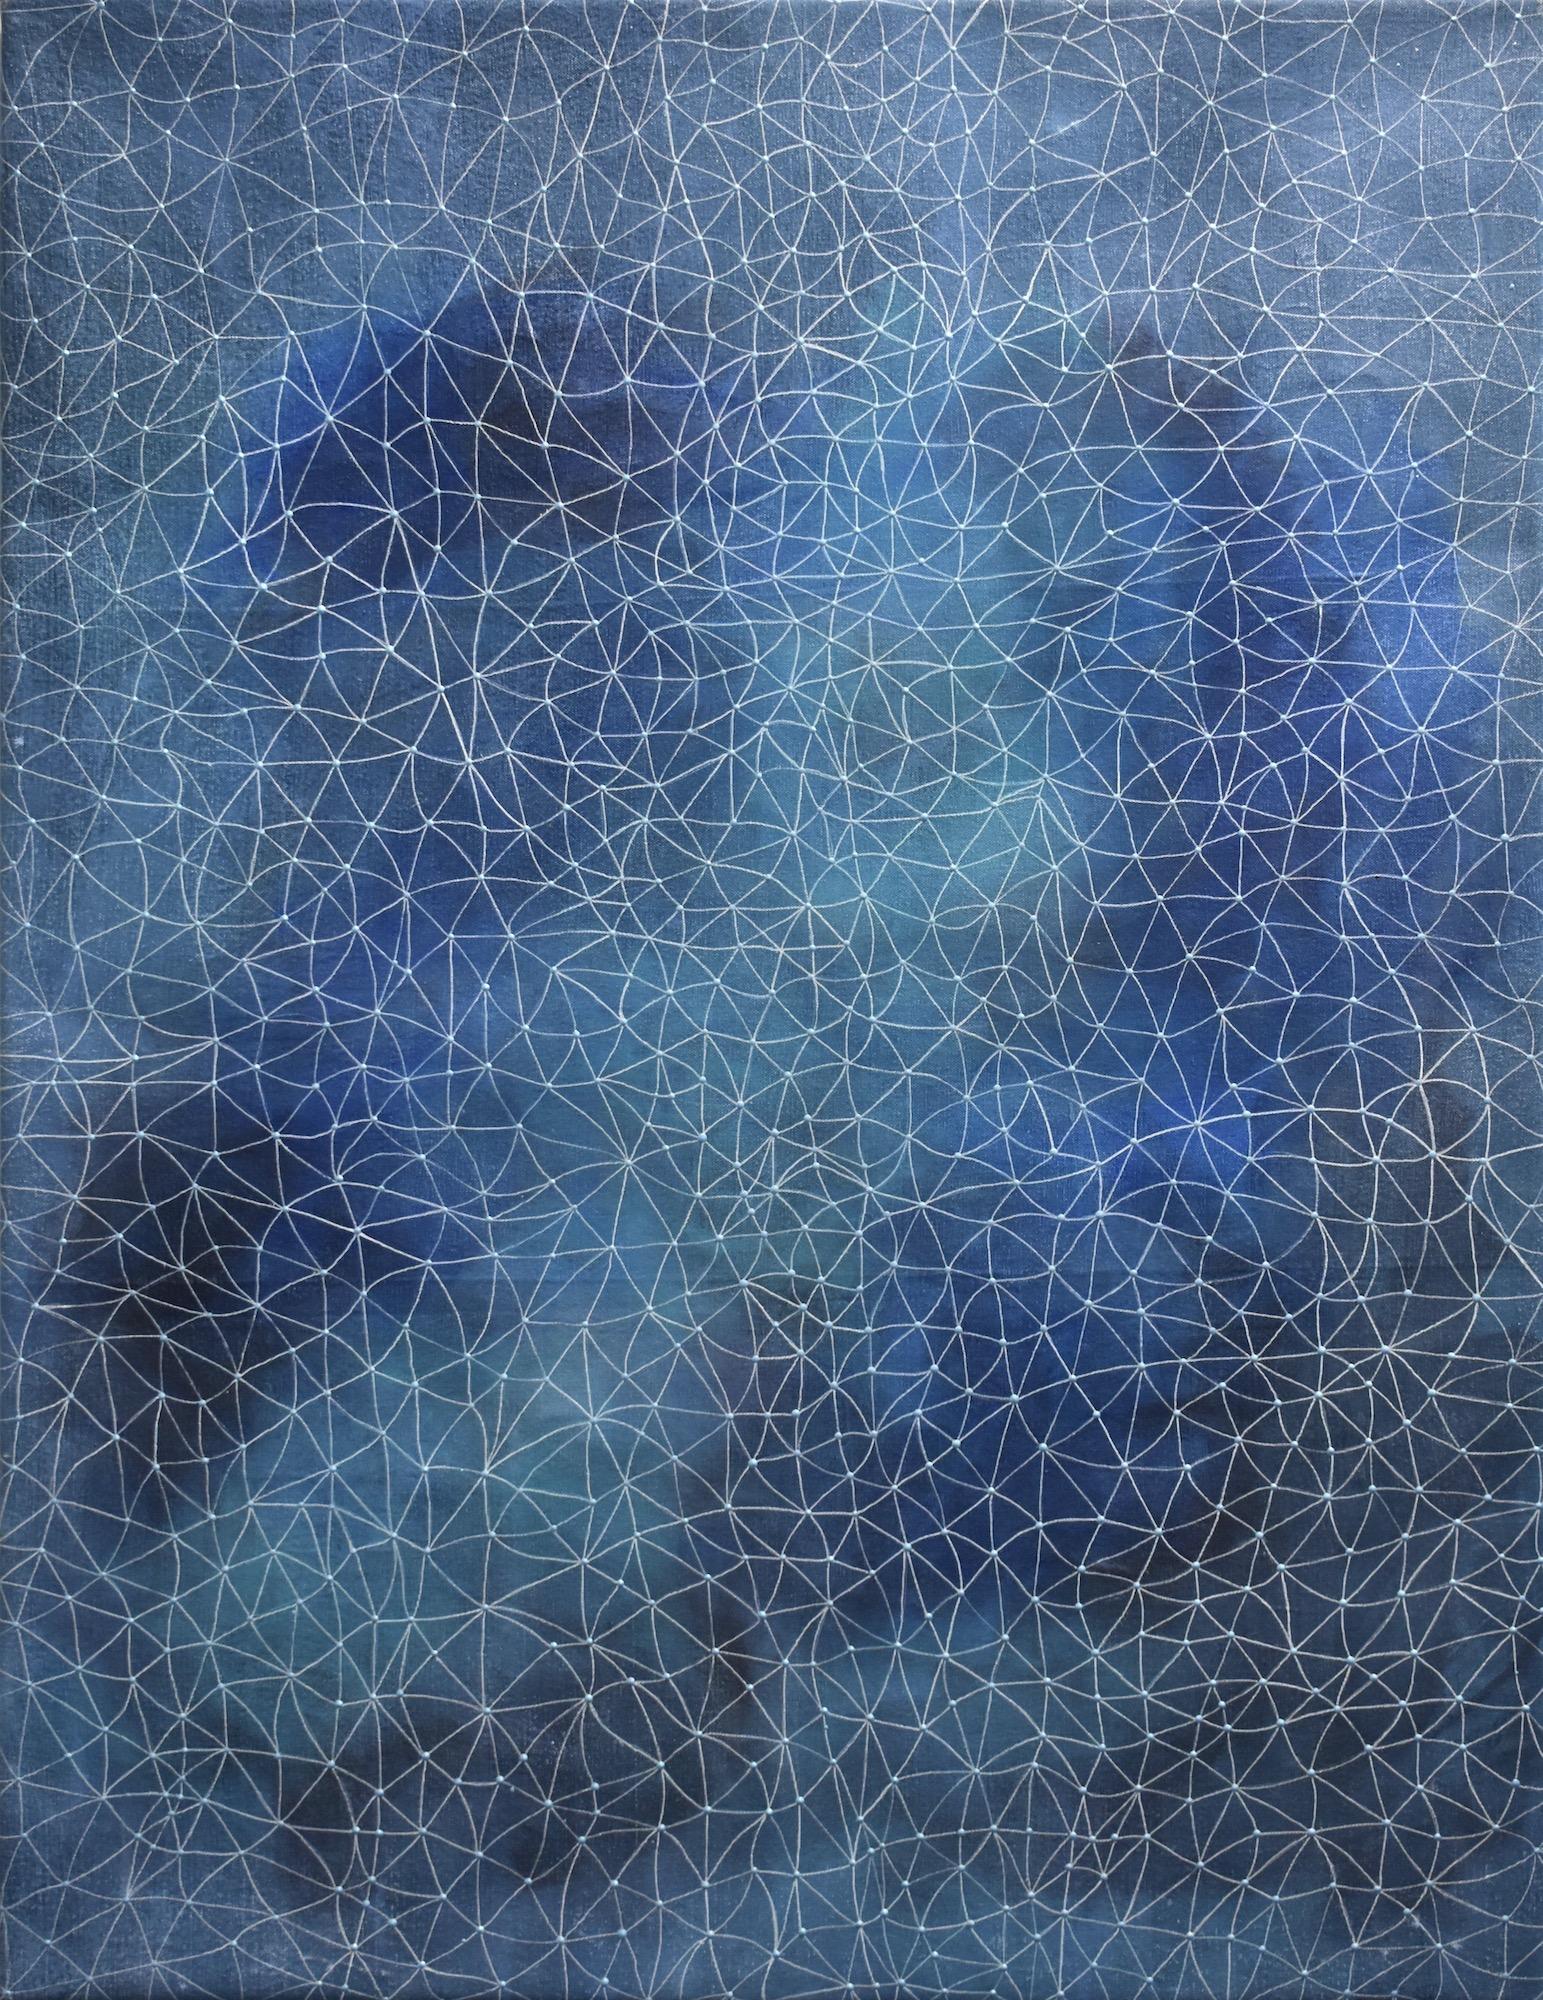 "Breath", abstract, textured, blues, net, white, lines, acrylic painting - Painting by Denise Driscoll